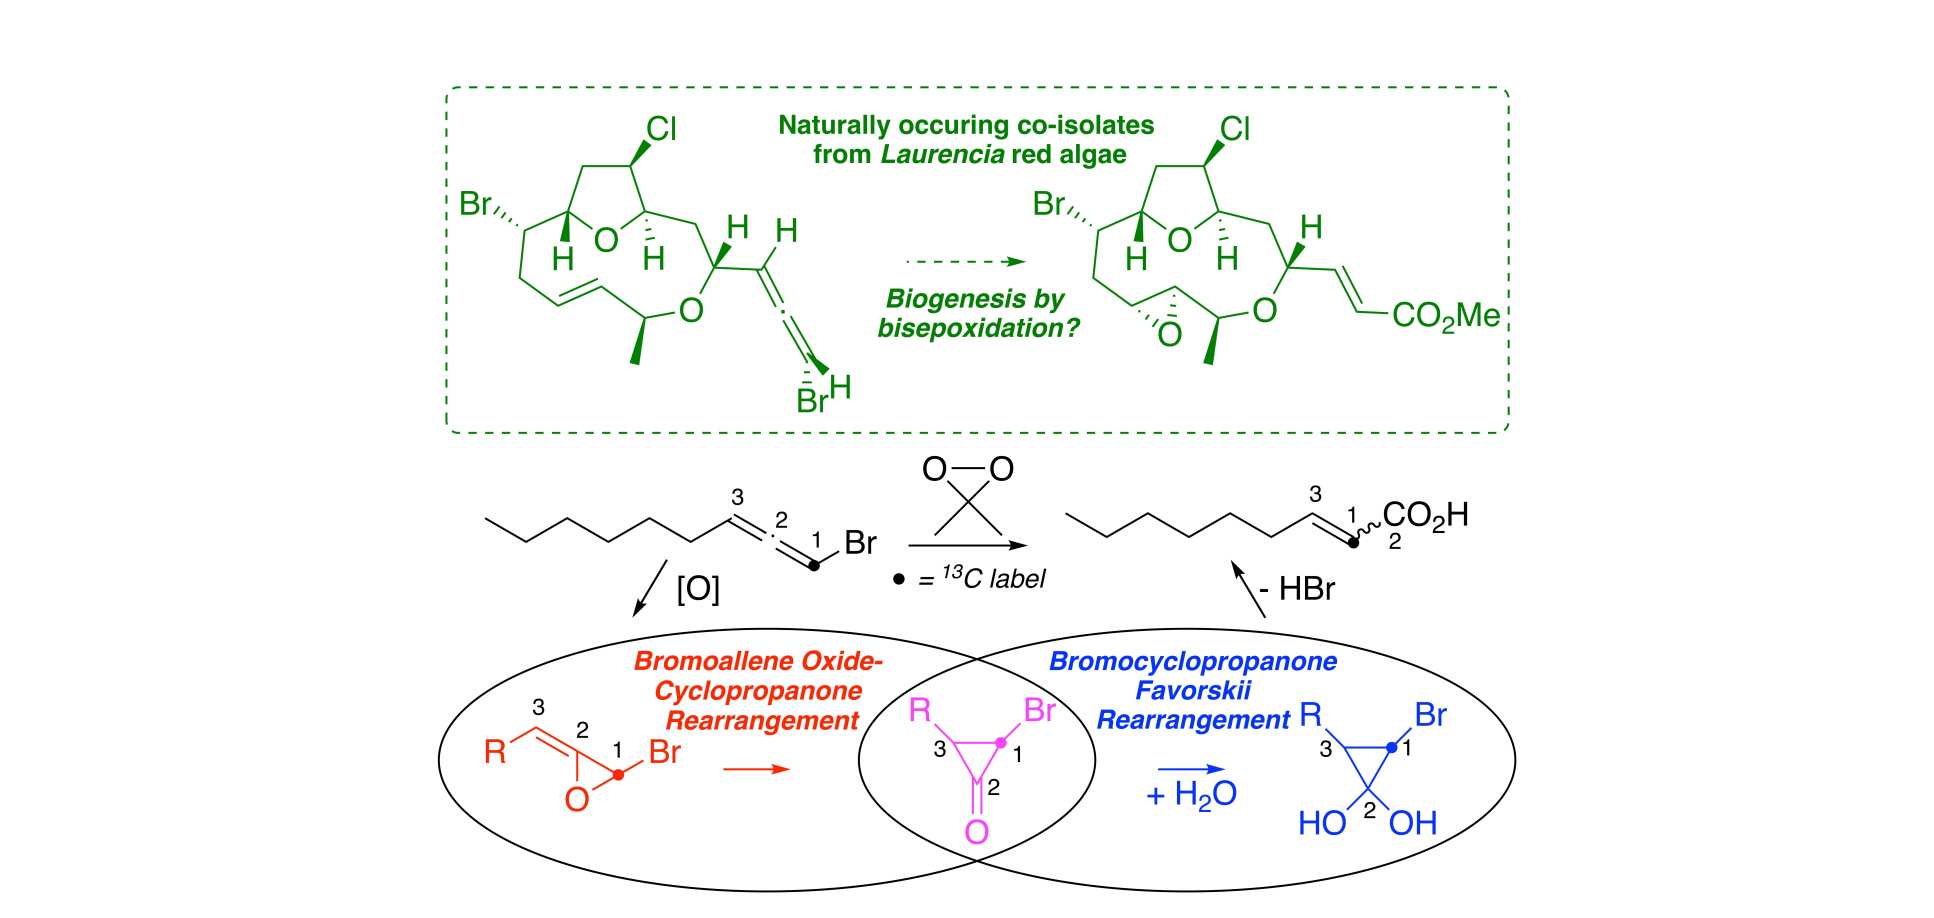 Summary scheme for paper: Epoxidation of Bromoallenes Connects Red Algae Metabolites by an Intersecting Bromoallene Oxide - Favorskii Manifold